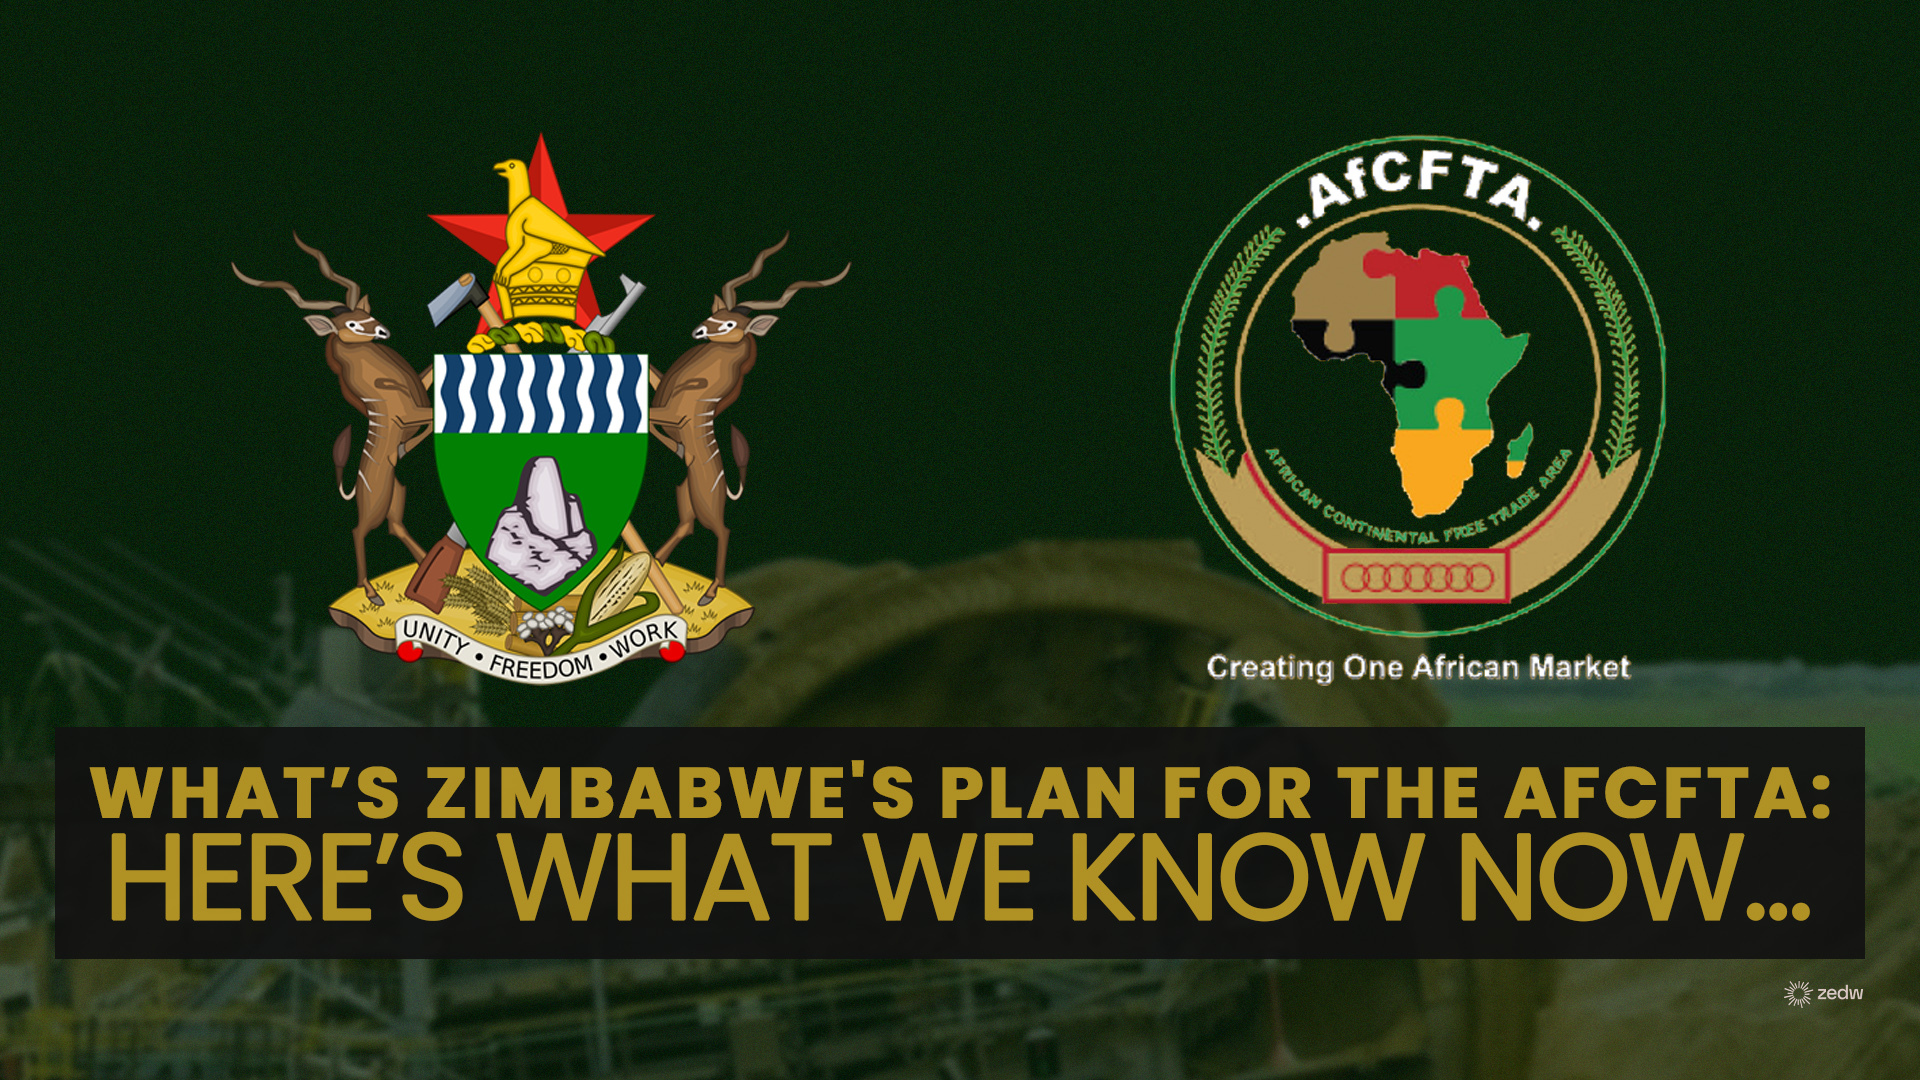 Zimbabwe & its plan for the AfCFTA: Here’s what we know…